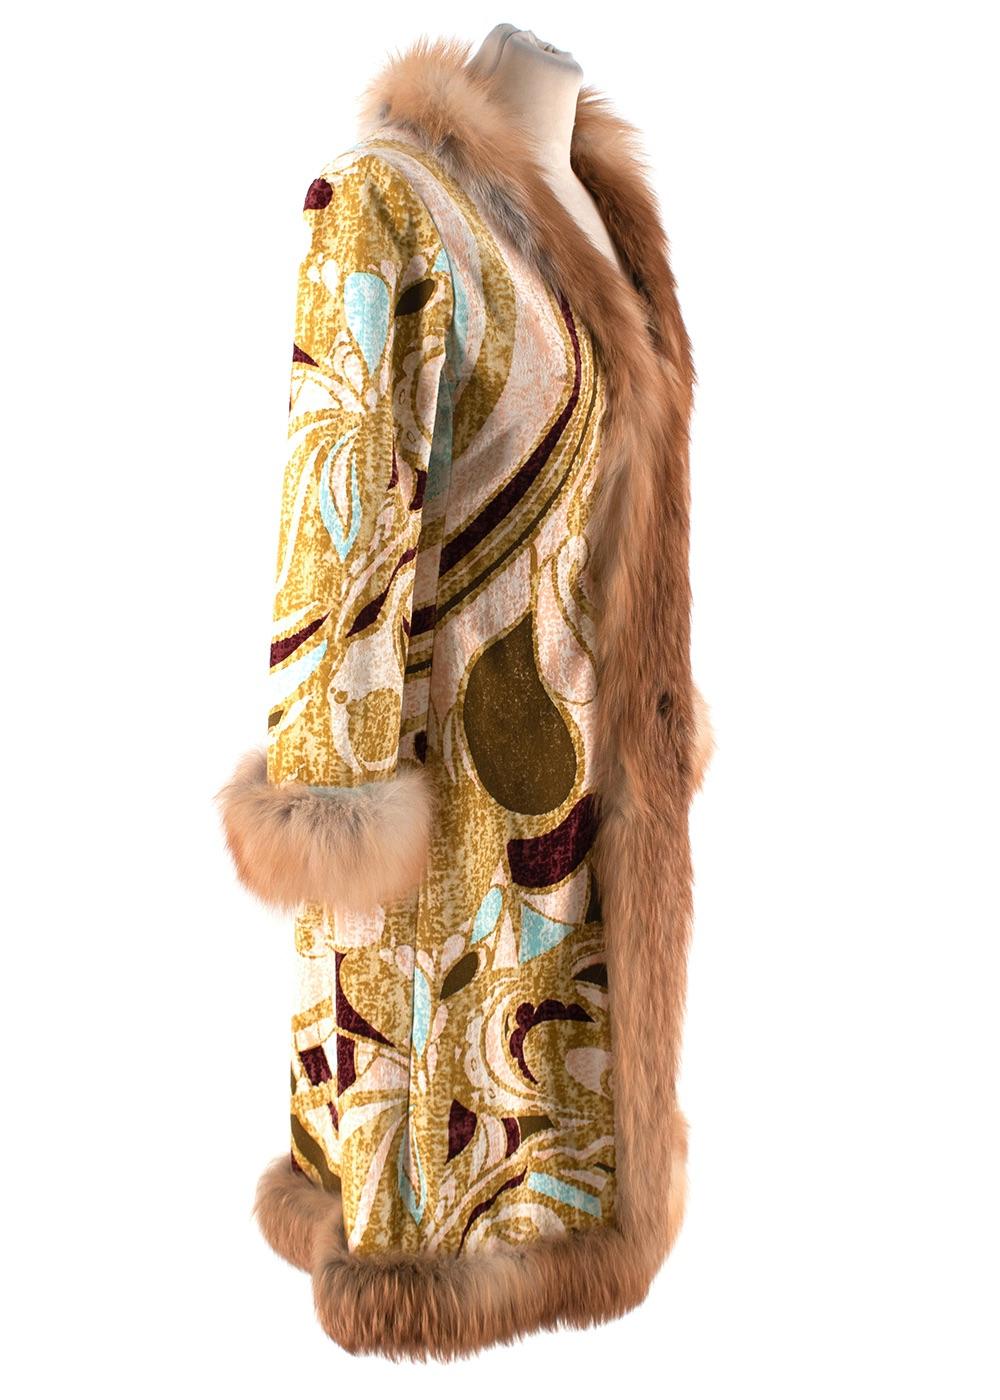 Emilio Pucci Printed Velour & Fox-Fur Trimmed Coat

- Incredible, 70's-style Penny Lane coat with all over abstract print, and fox fur-trimmed front and cuffs
- Hook and eye closure
- Lined in green silk-blend jacquard 

Shoulder: 35.5 cm 
Chest: 44